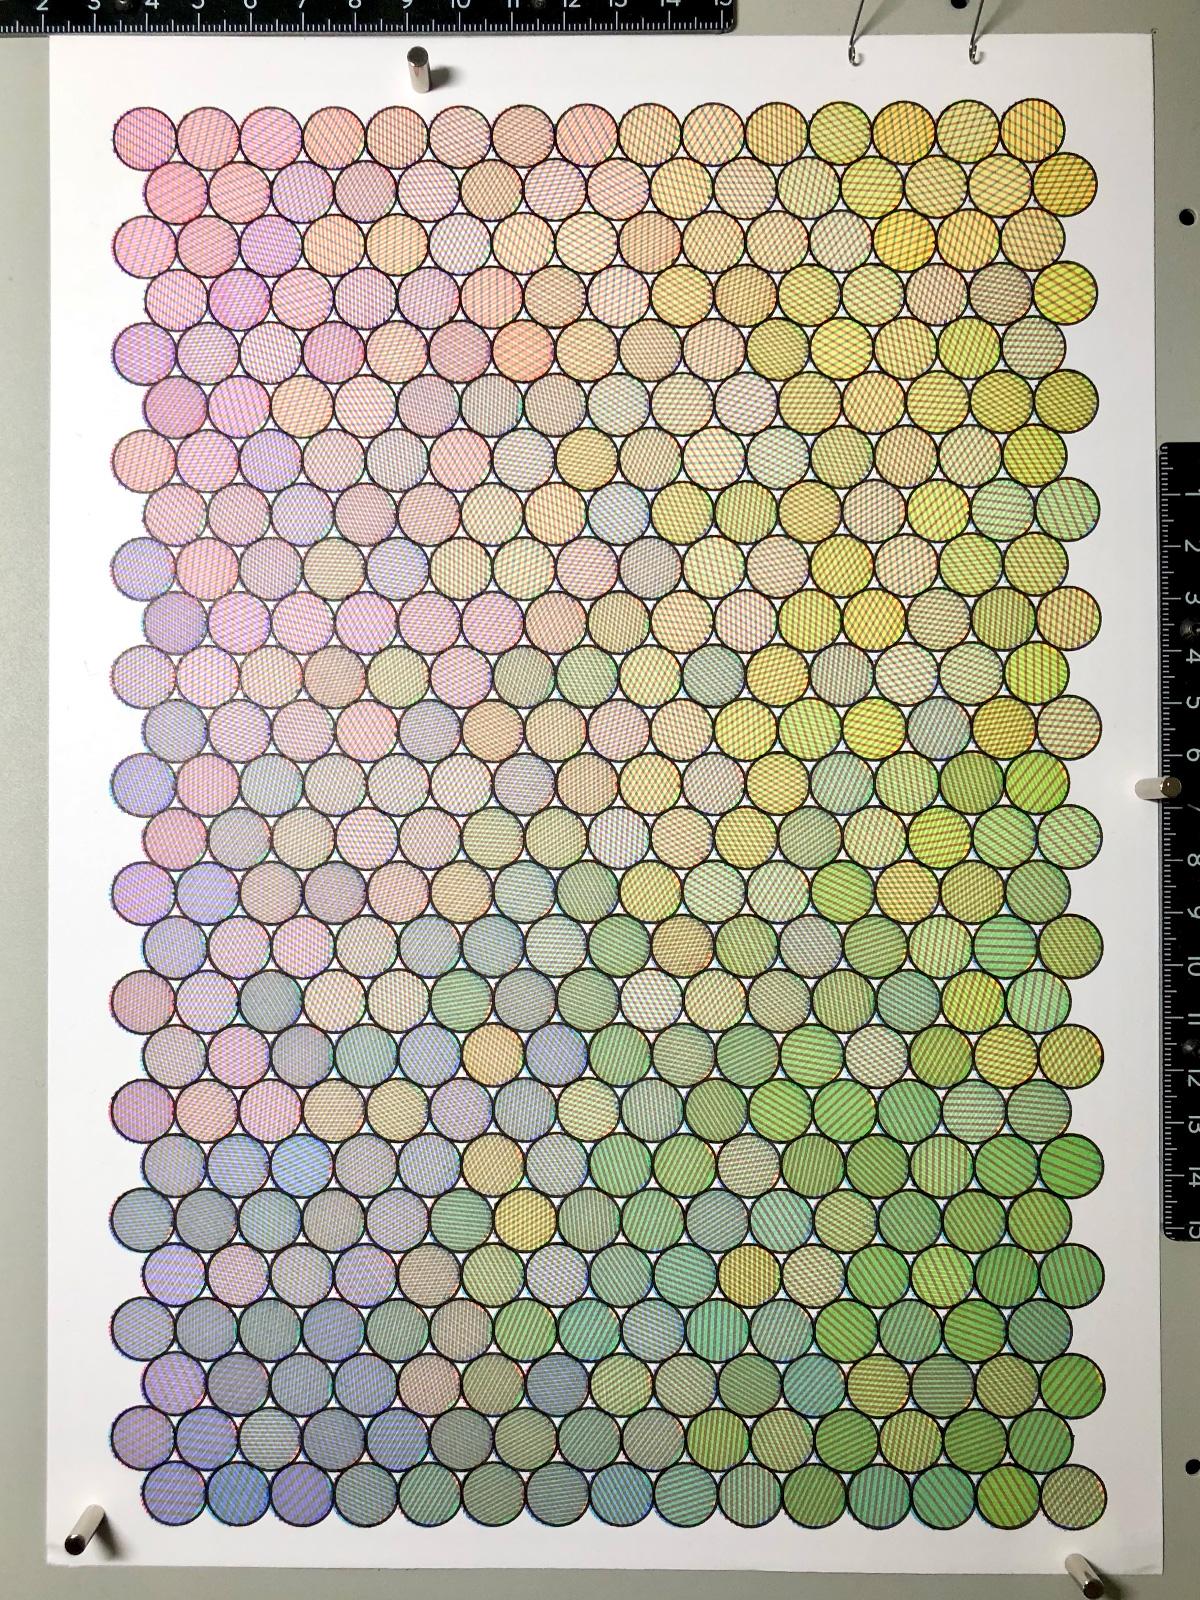 An overview of the piece. Circles are packed into a 15x26 grid, each appearing a slightly different colour based on the coloured lines within